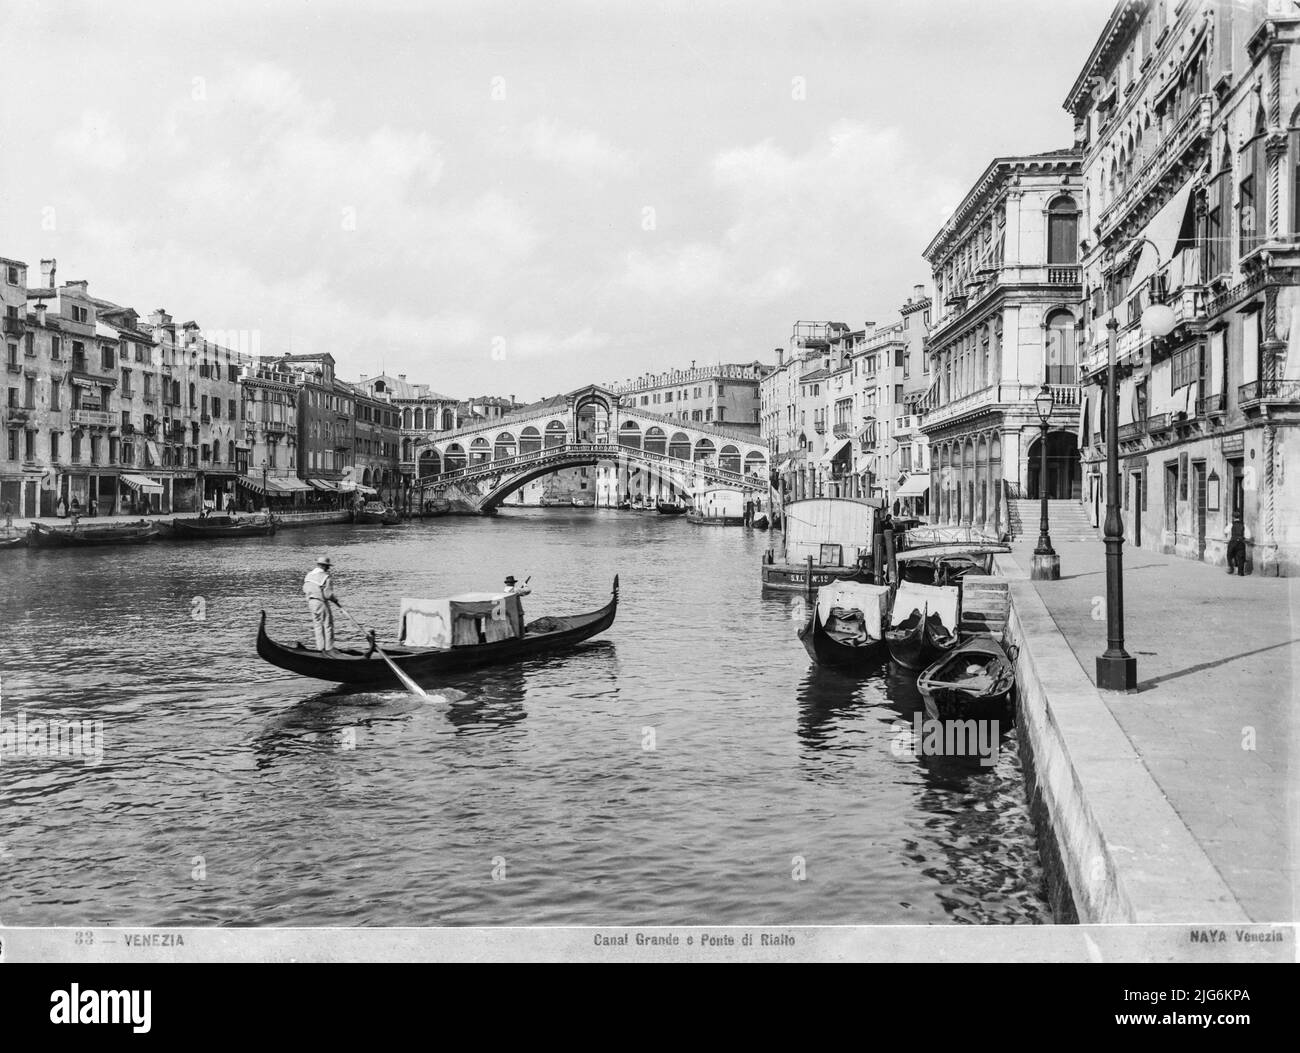 made by Carlo Naya between 1868 and 1882. The historical archive of Naya-Bohm is an archive of 25000 glass plates, now digitalized, of pictures of Venice from 1868 until 1882 (Carlo Naya), and then until 1950 (Bohm). Stock Photo